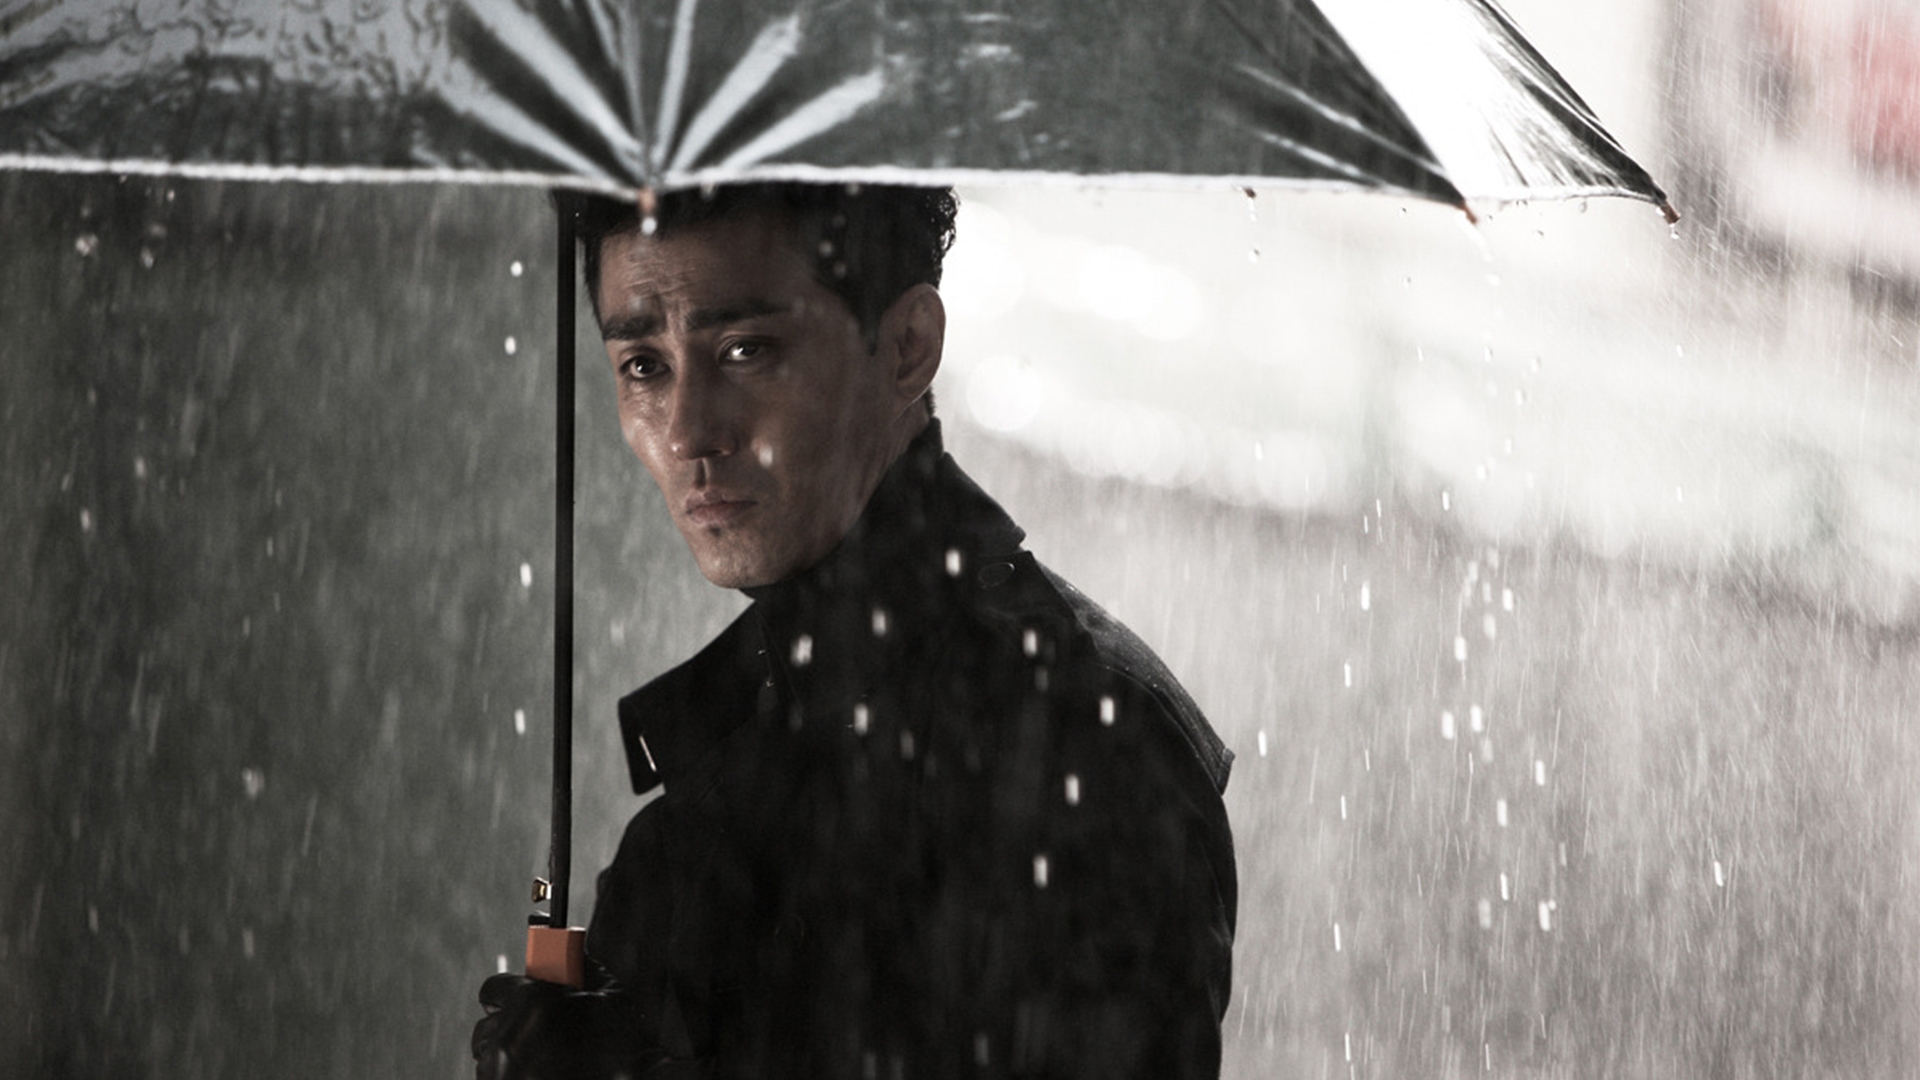 Man on High Heels Cha Seung-won Movie Review